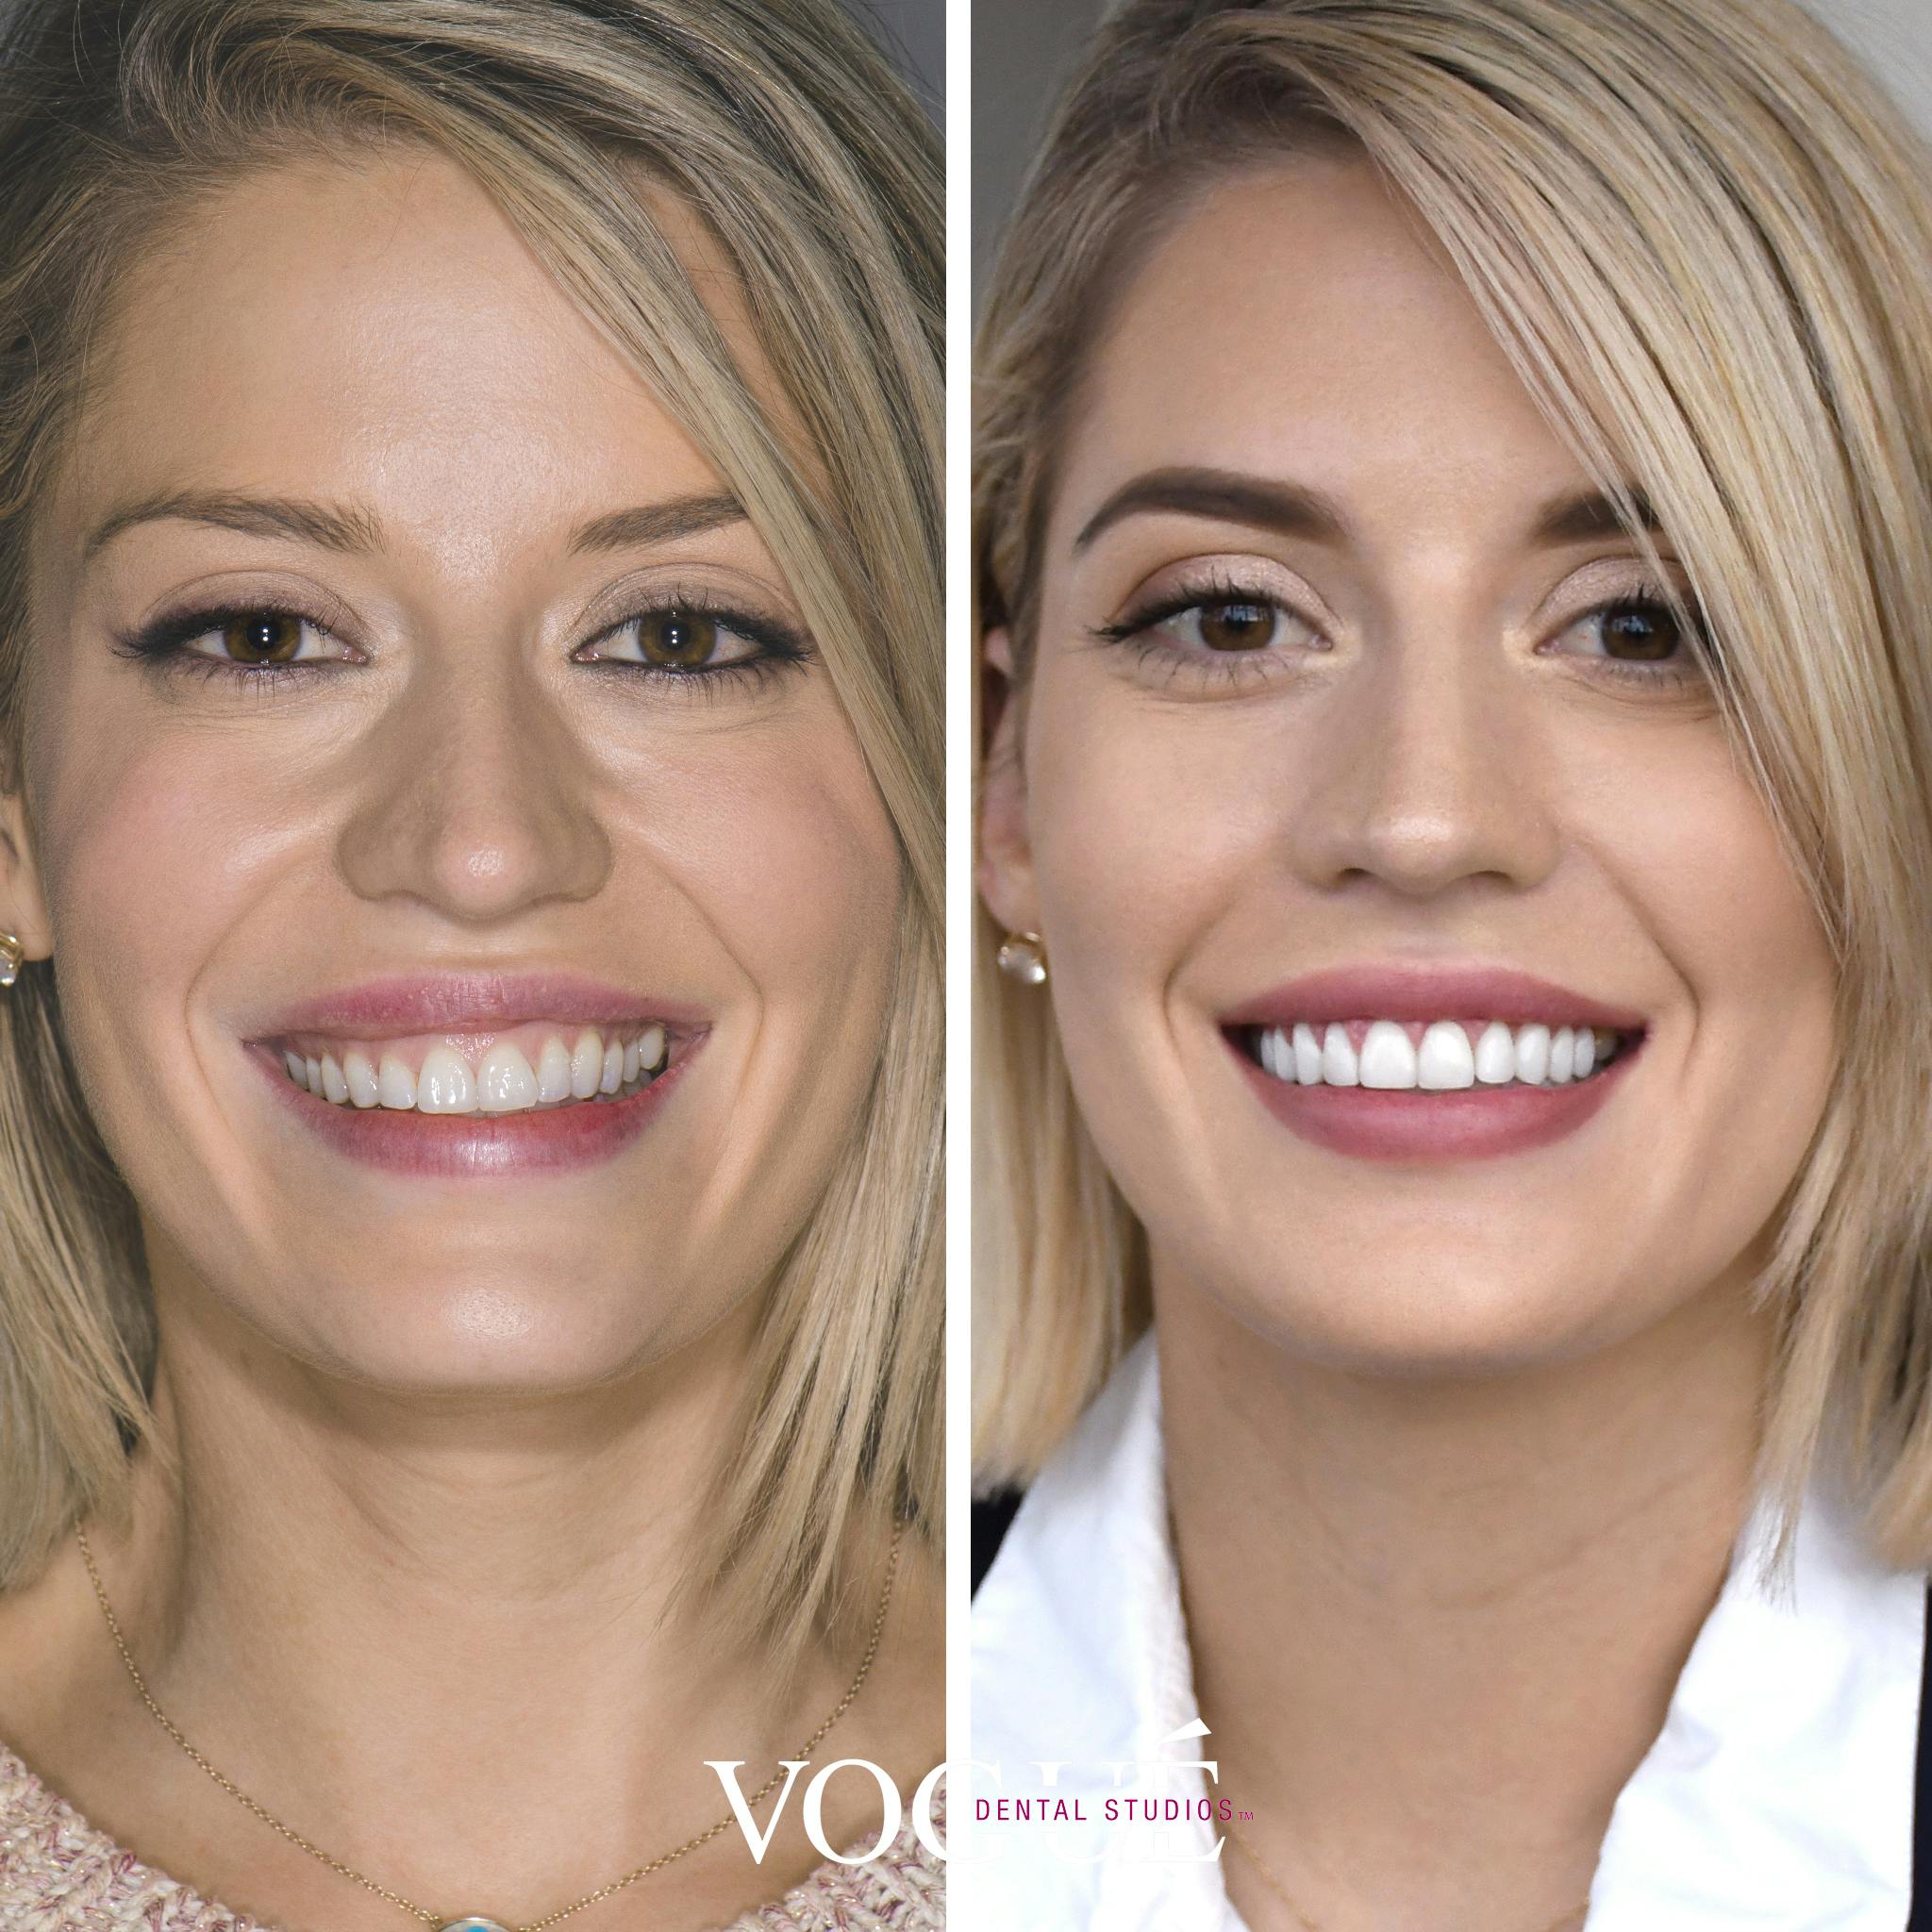 Before and after a canted smile or skewed smile treated with porcelain veneers and gum laser surgery.